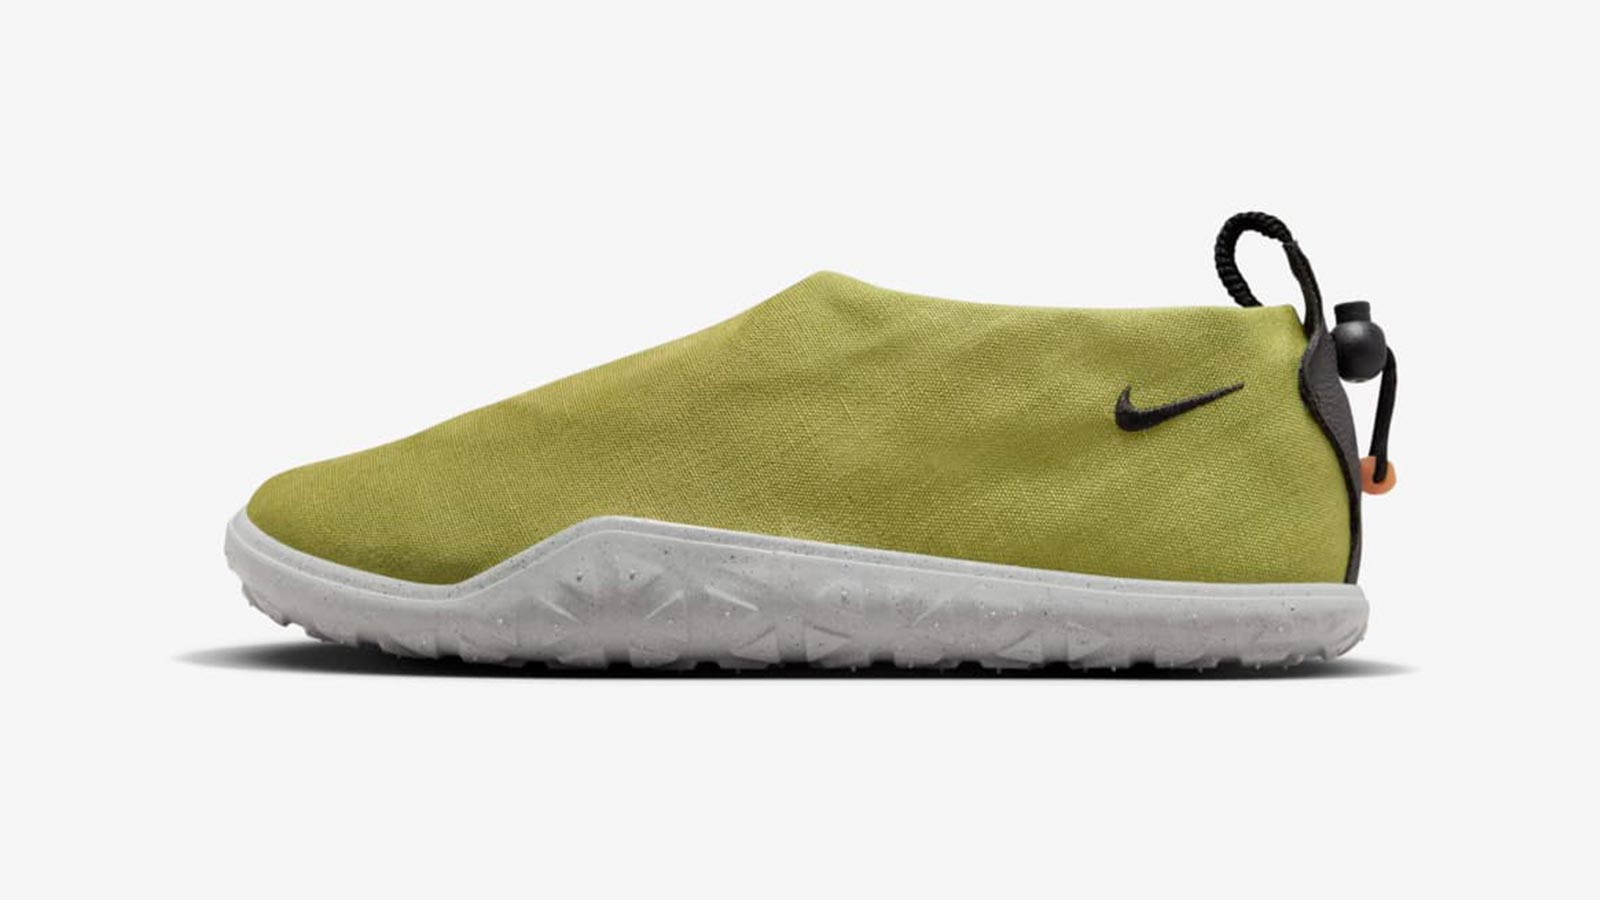 Step Into Comfort With Nike's ACG Moc Shoe In Moss And Anthracite ...